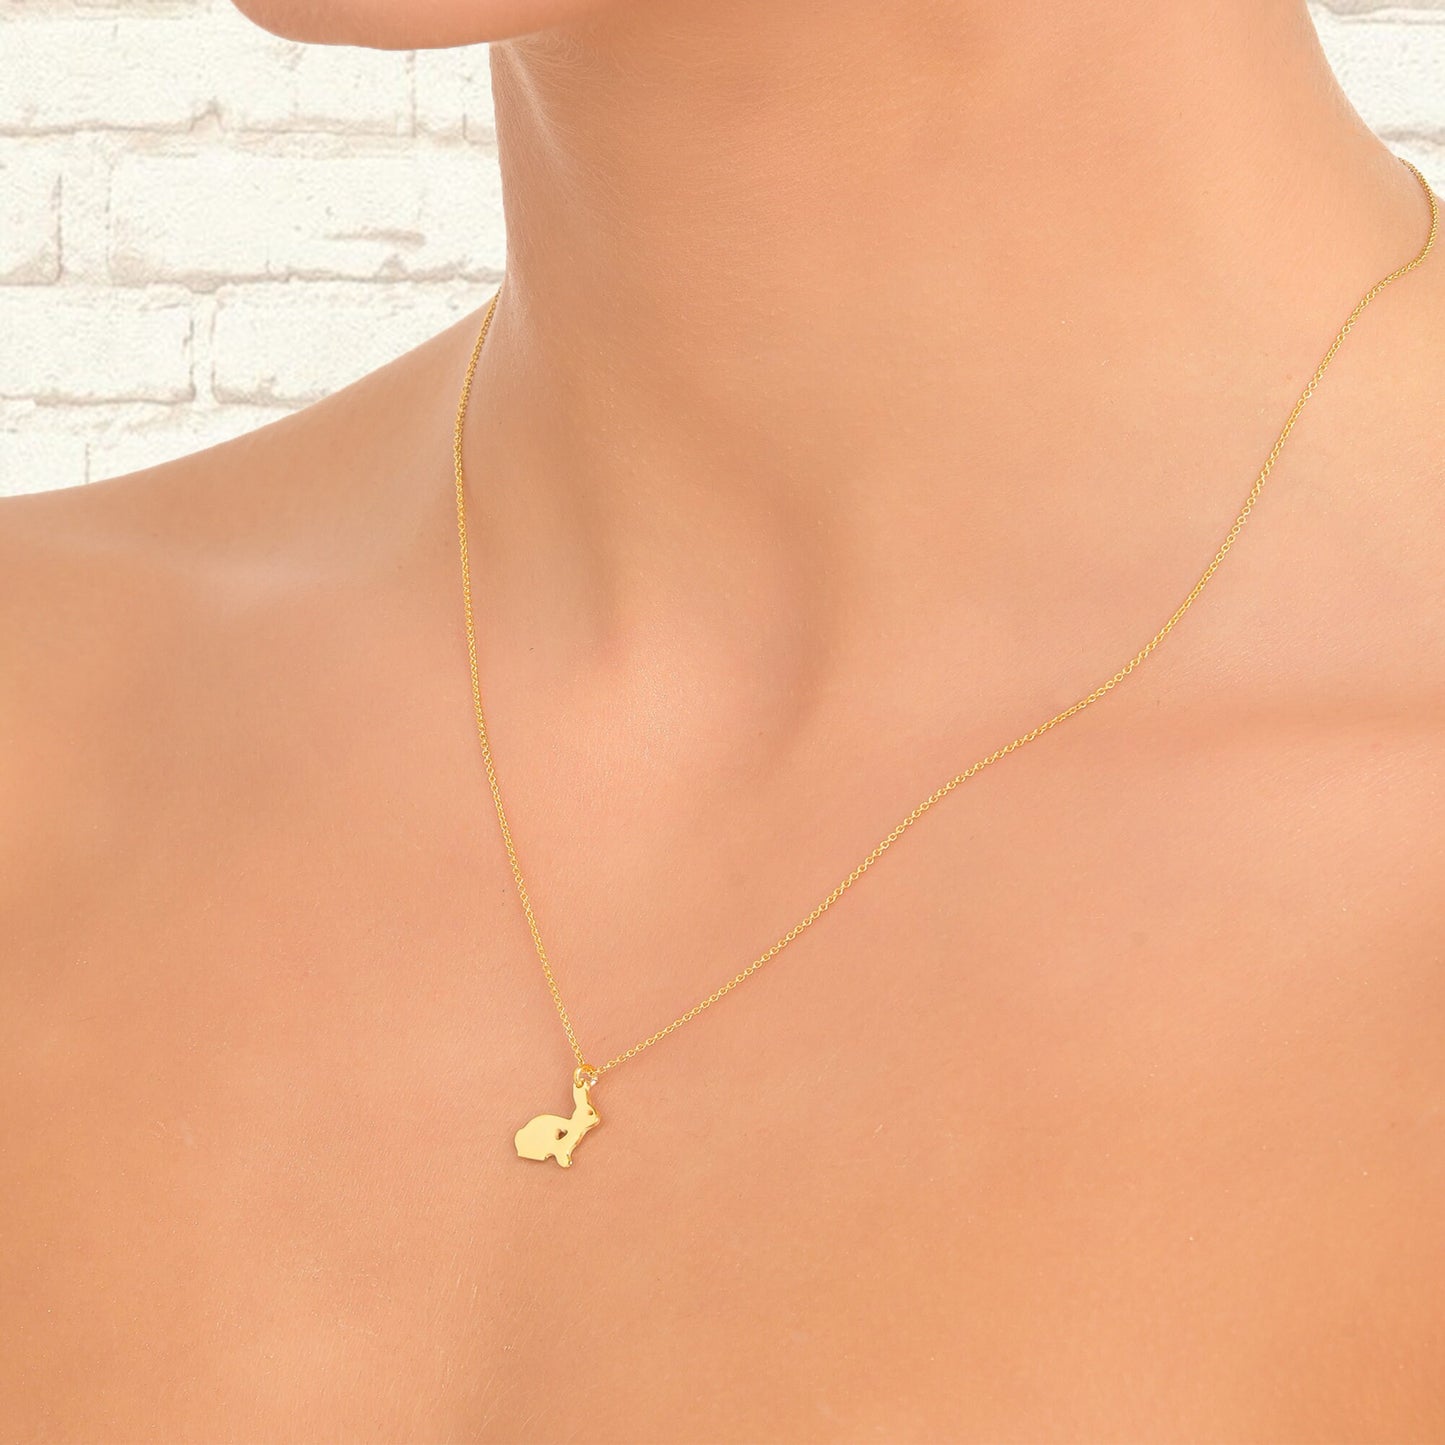 Dainty gold Rabbit necklace, 14K Gold Rabbit necklace, animal jewelry, Rabbit jewelry, layered gold necklace birthday gifts for her